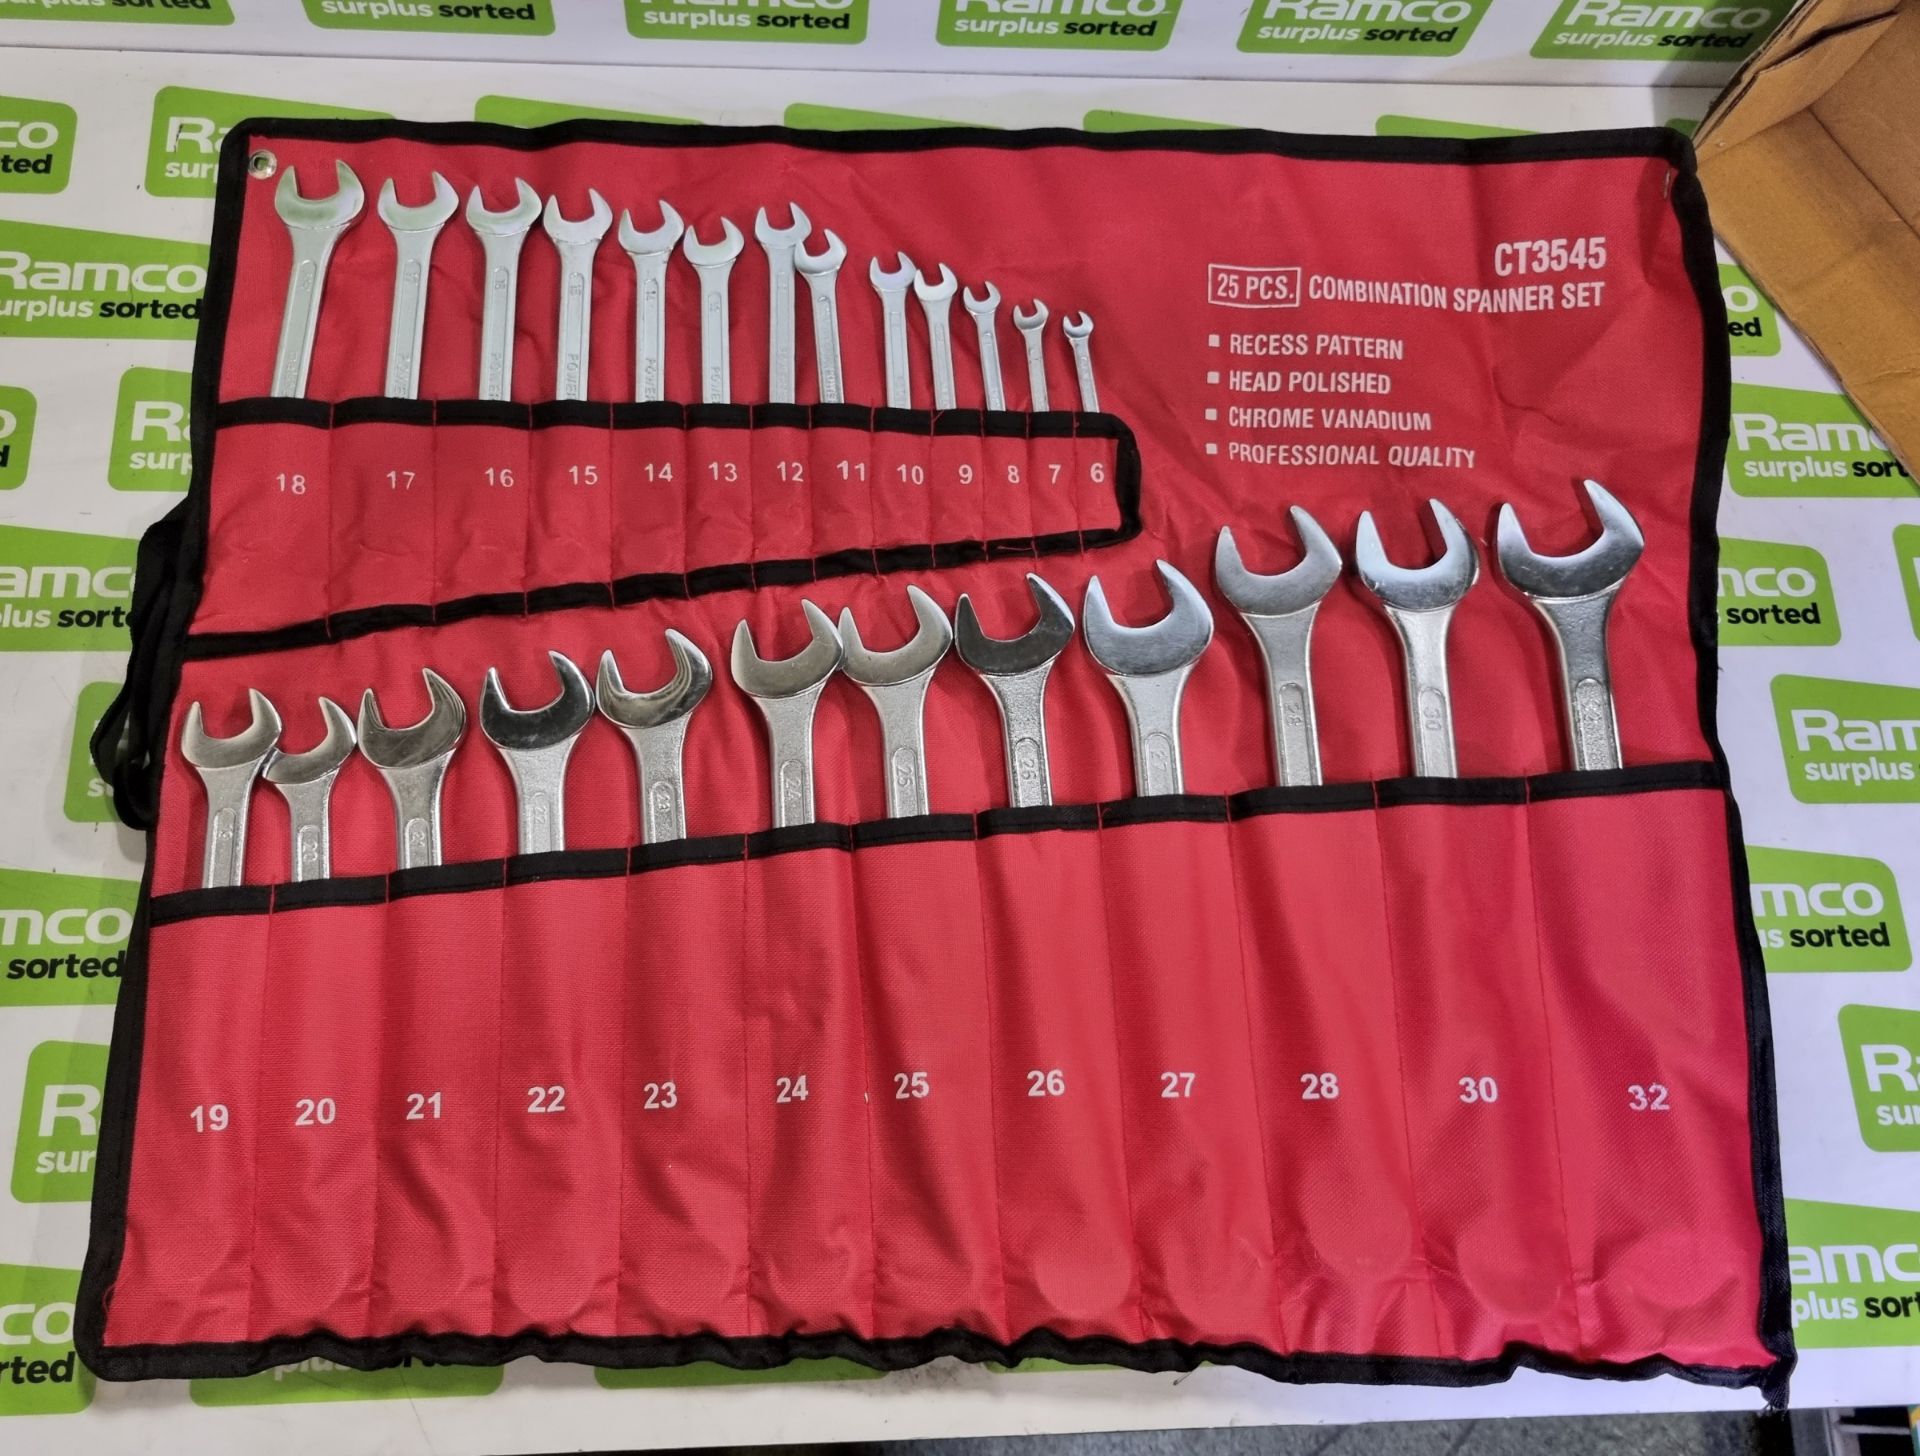 25pc combination spanner set - sizes 19-32mm - Image 4 of 4